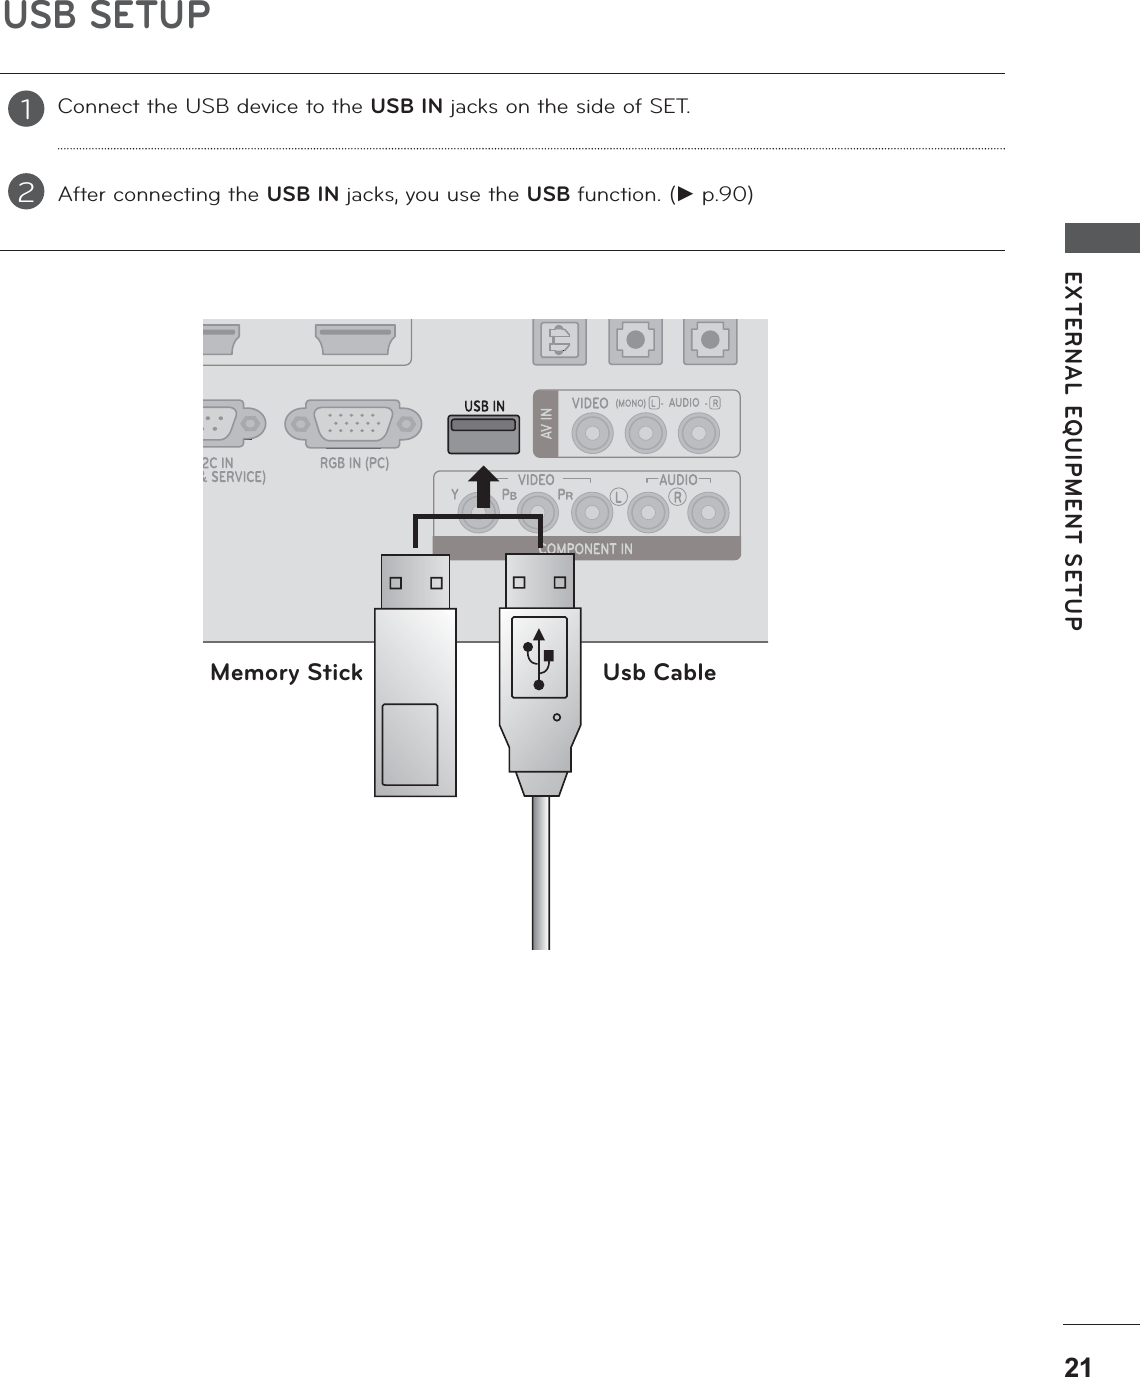 EXTERNAL EQUIPMENT SETUPUSB SETUPConnect the USB device to the USB IN jacks on the side of SET.After connecting the USB IN jacks, you use the USB function. ( p.90)12Memory Stick Usb Cable